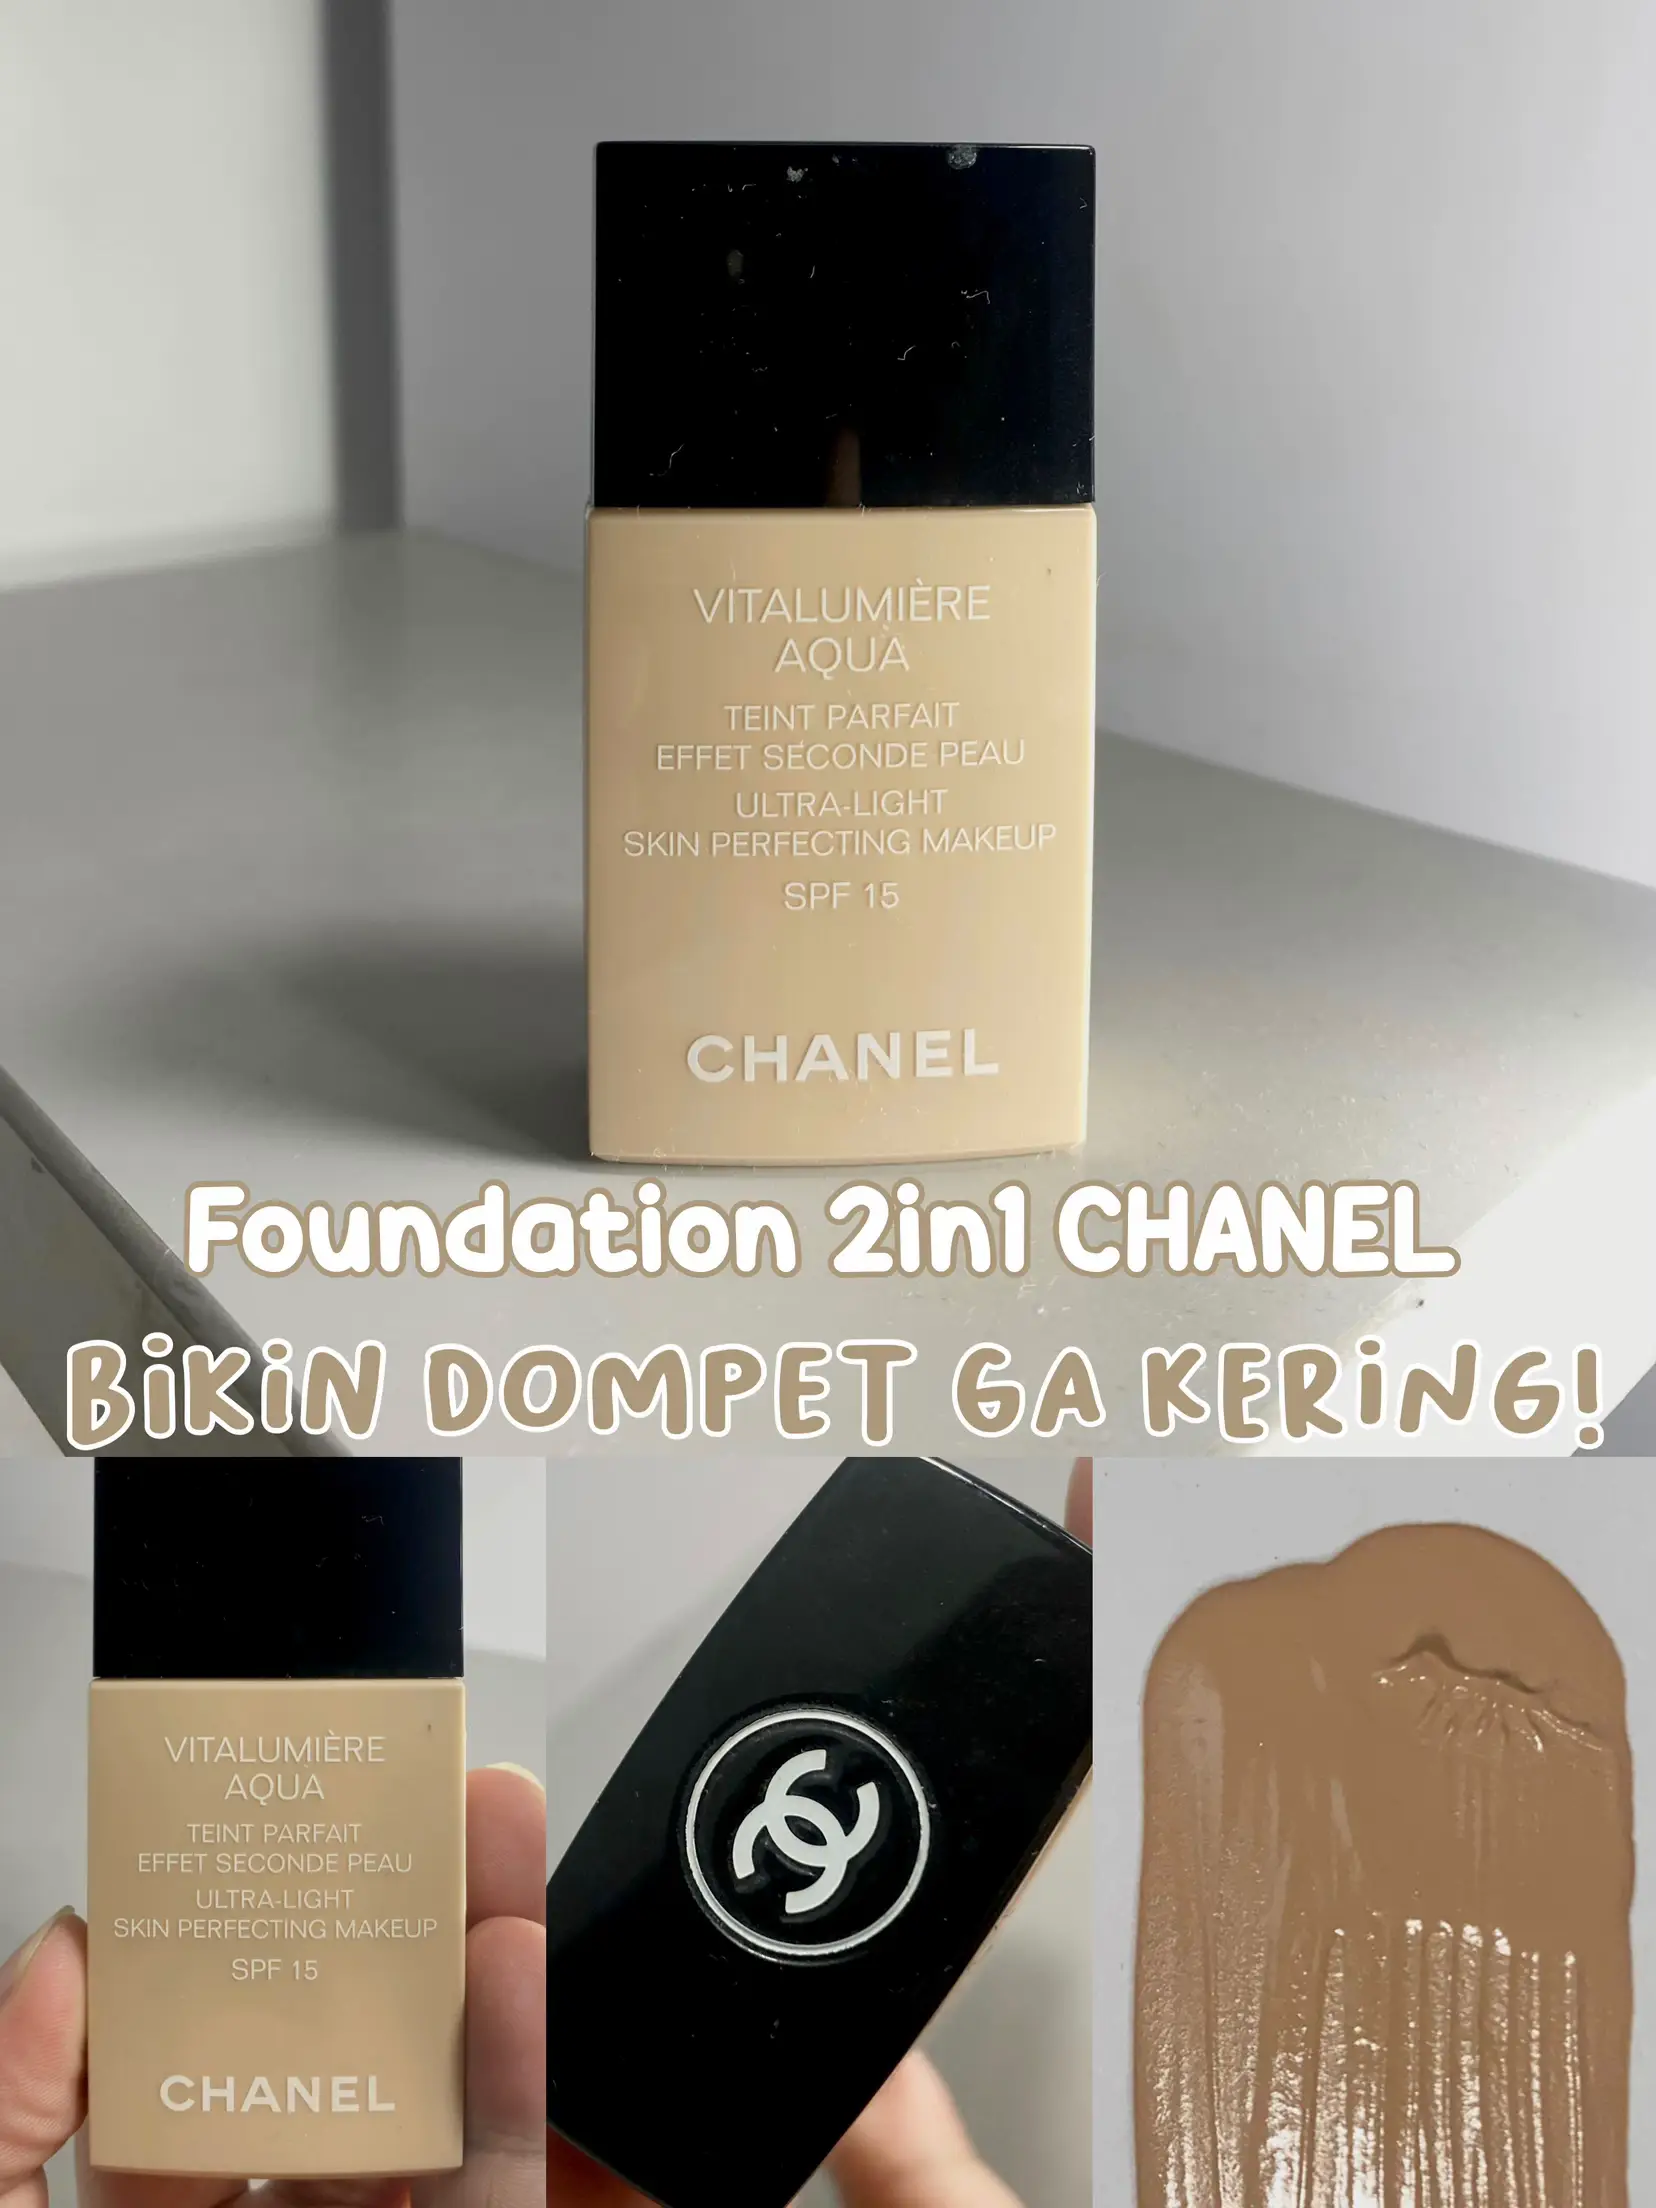 Best Chanel Foundation For Daily, Gallery posted by Halim Kartham